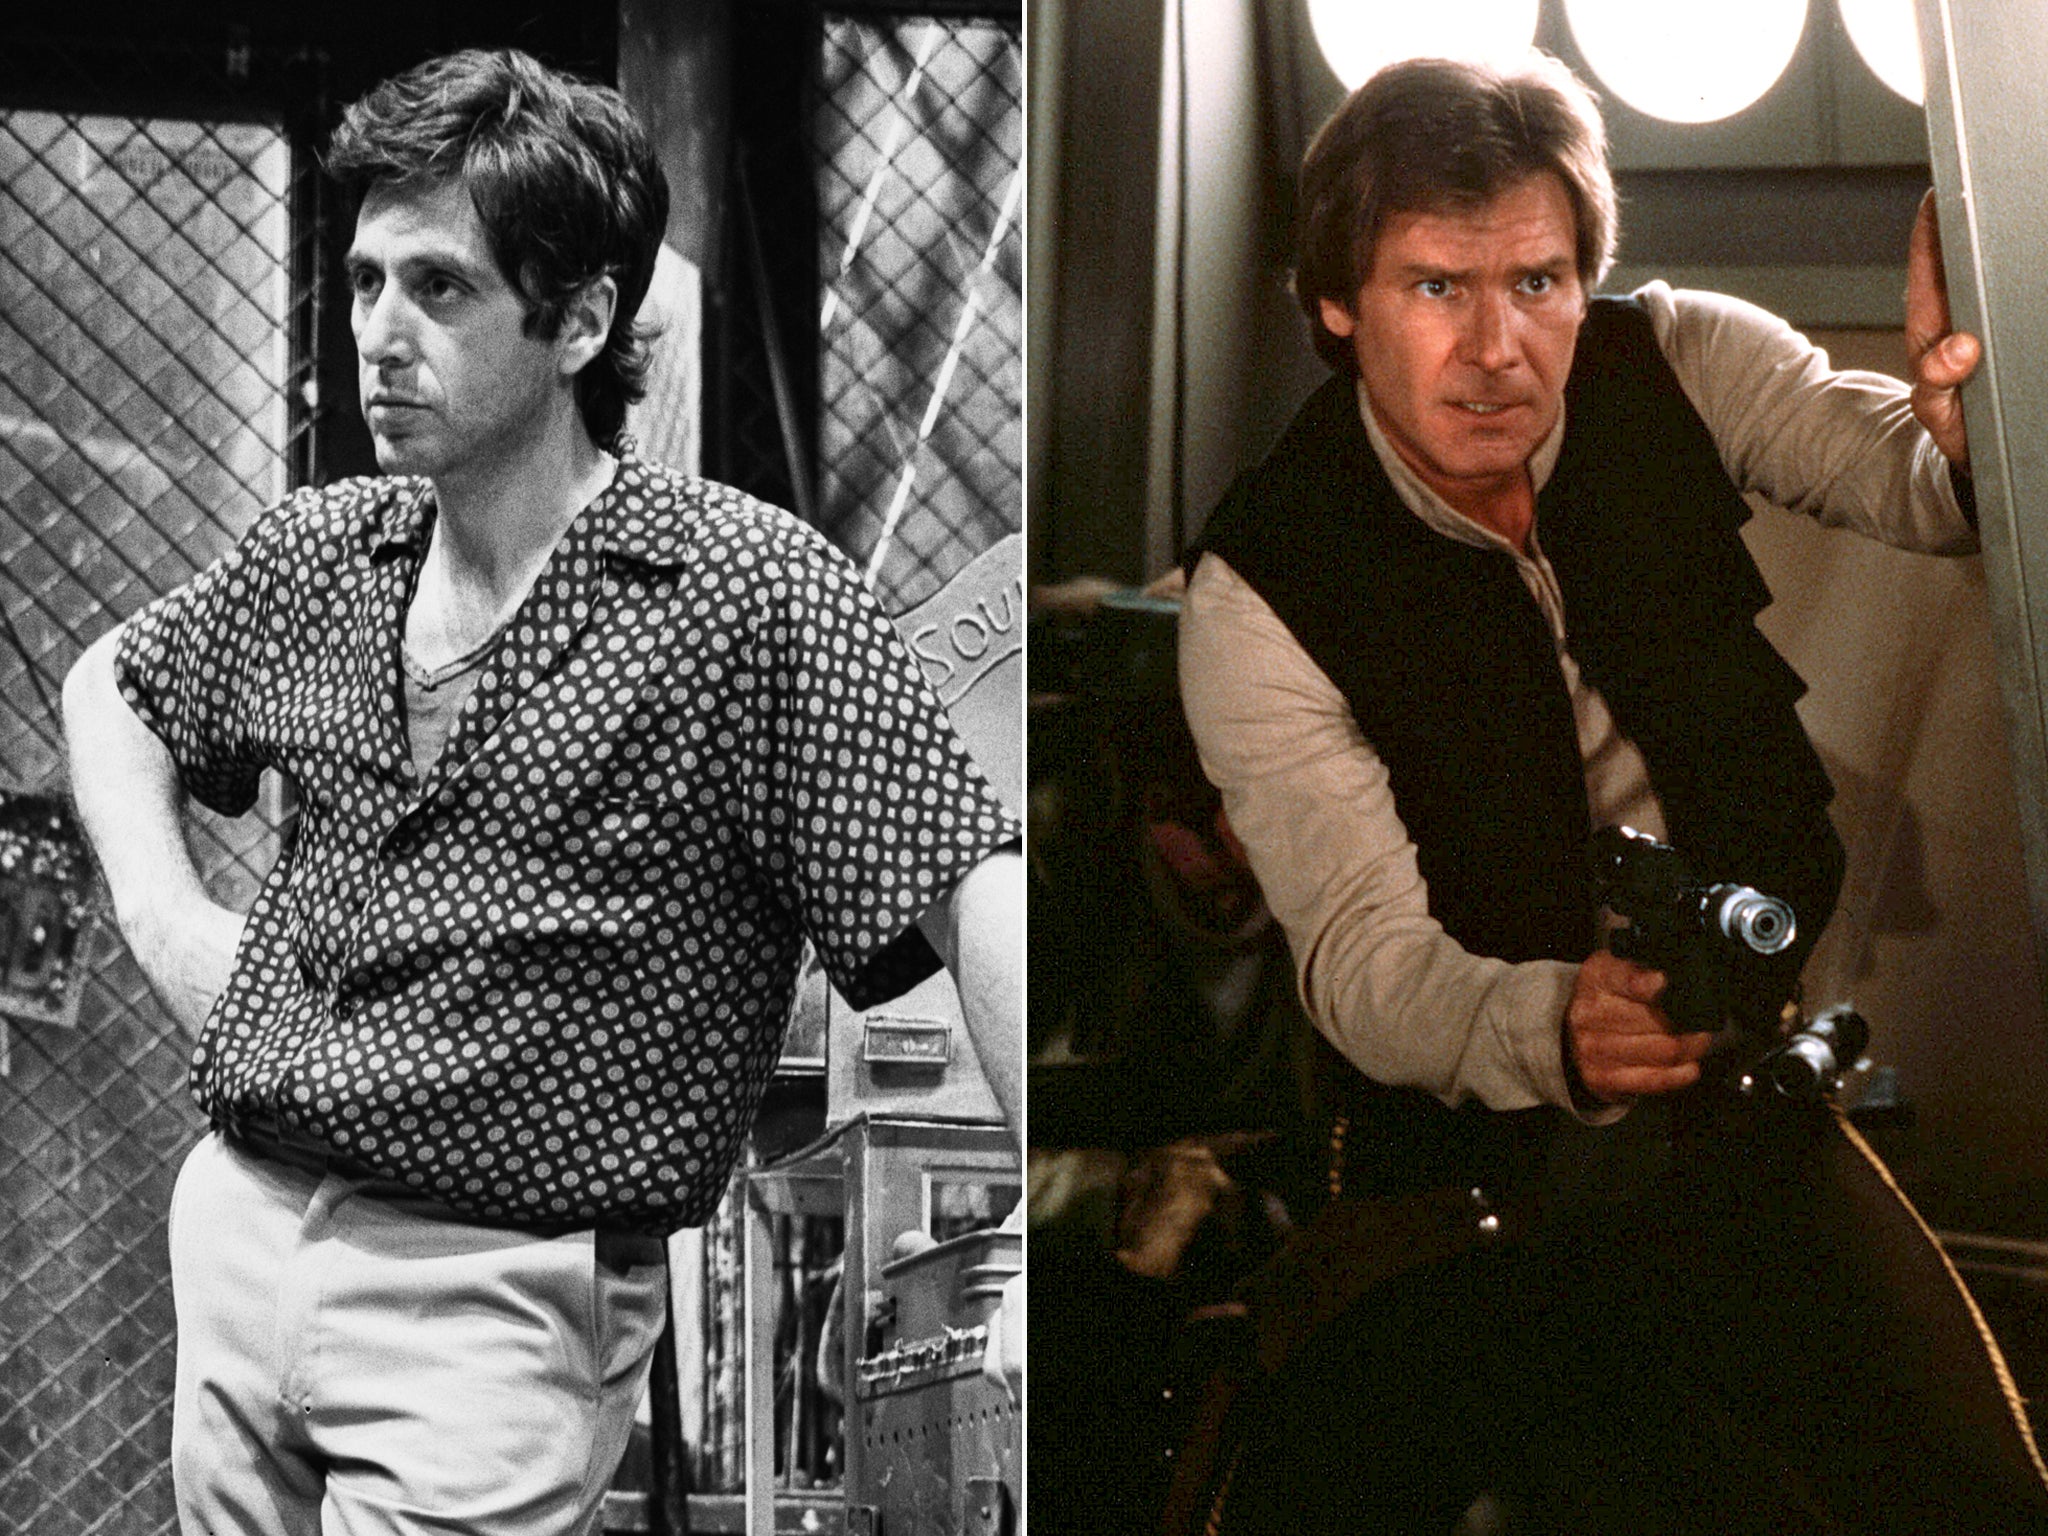 Al Pacino was offered the role of Han Solo in ‘Star Wars’ before Harrison Ford landed the part